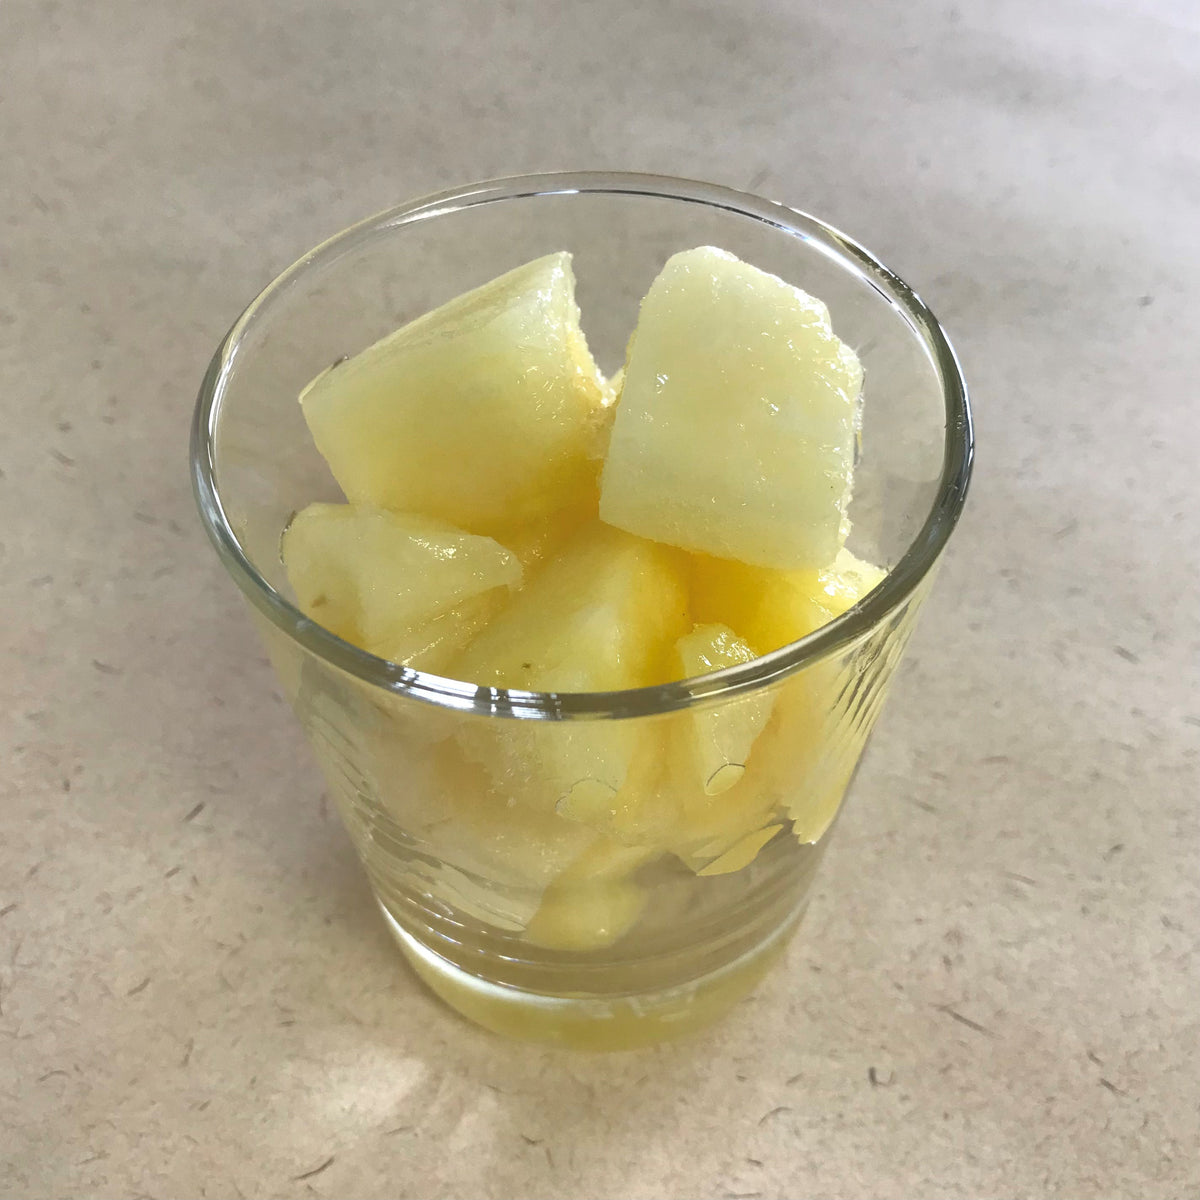 Certified Organic All-Natural Frozen Pineapple Chunks from Costa Rica B-Grade (1kg) - Horizon Farms